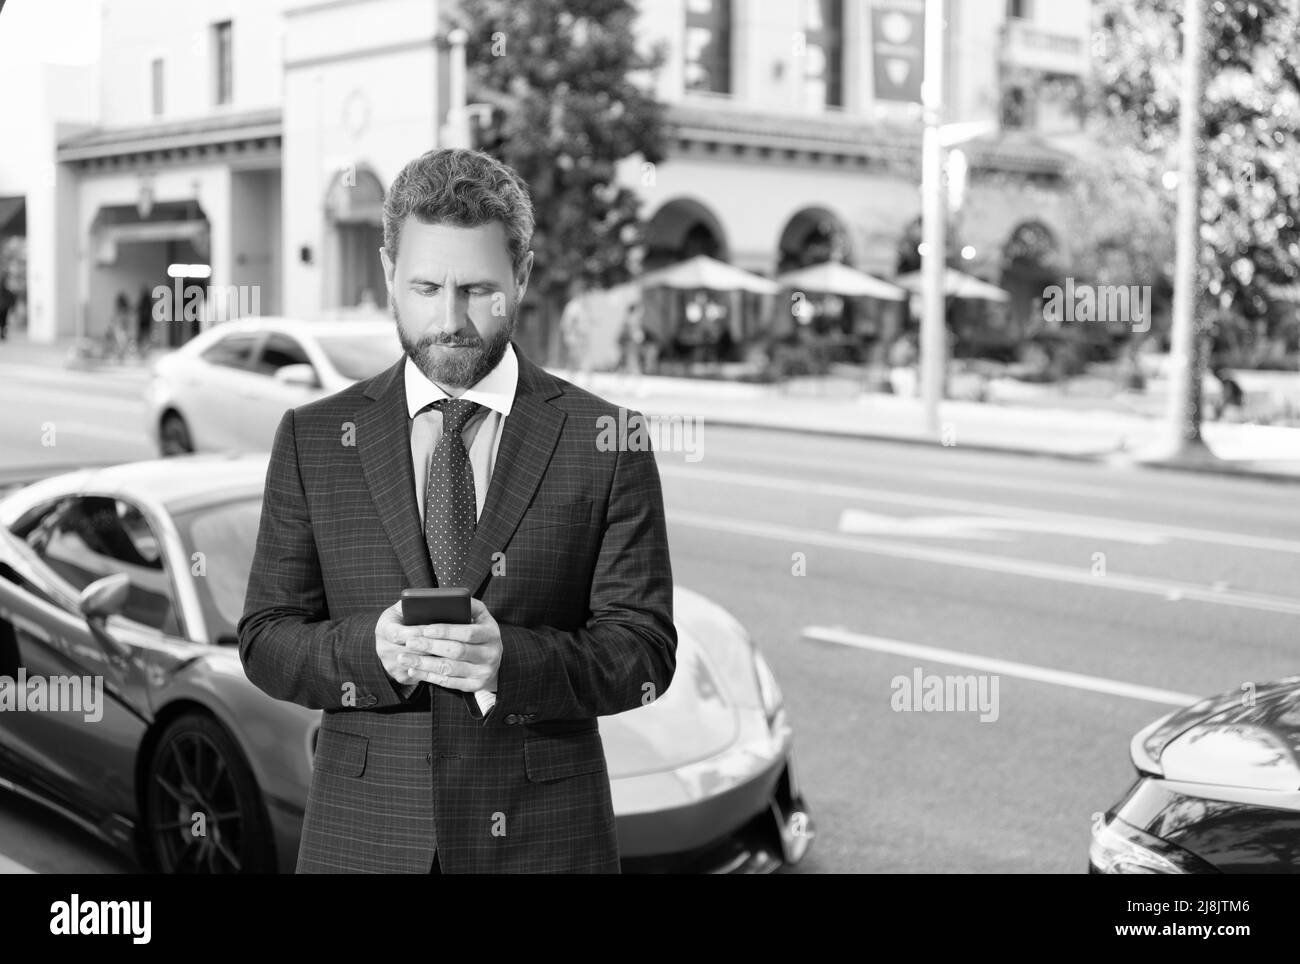 handsome businessman chatting on smartphone stand by luxury auto outdoor. car available. Stock Photo